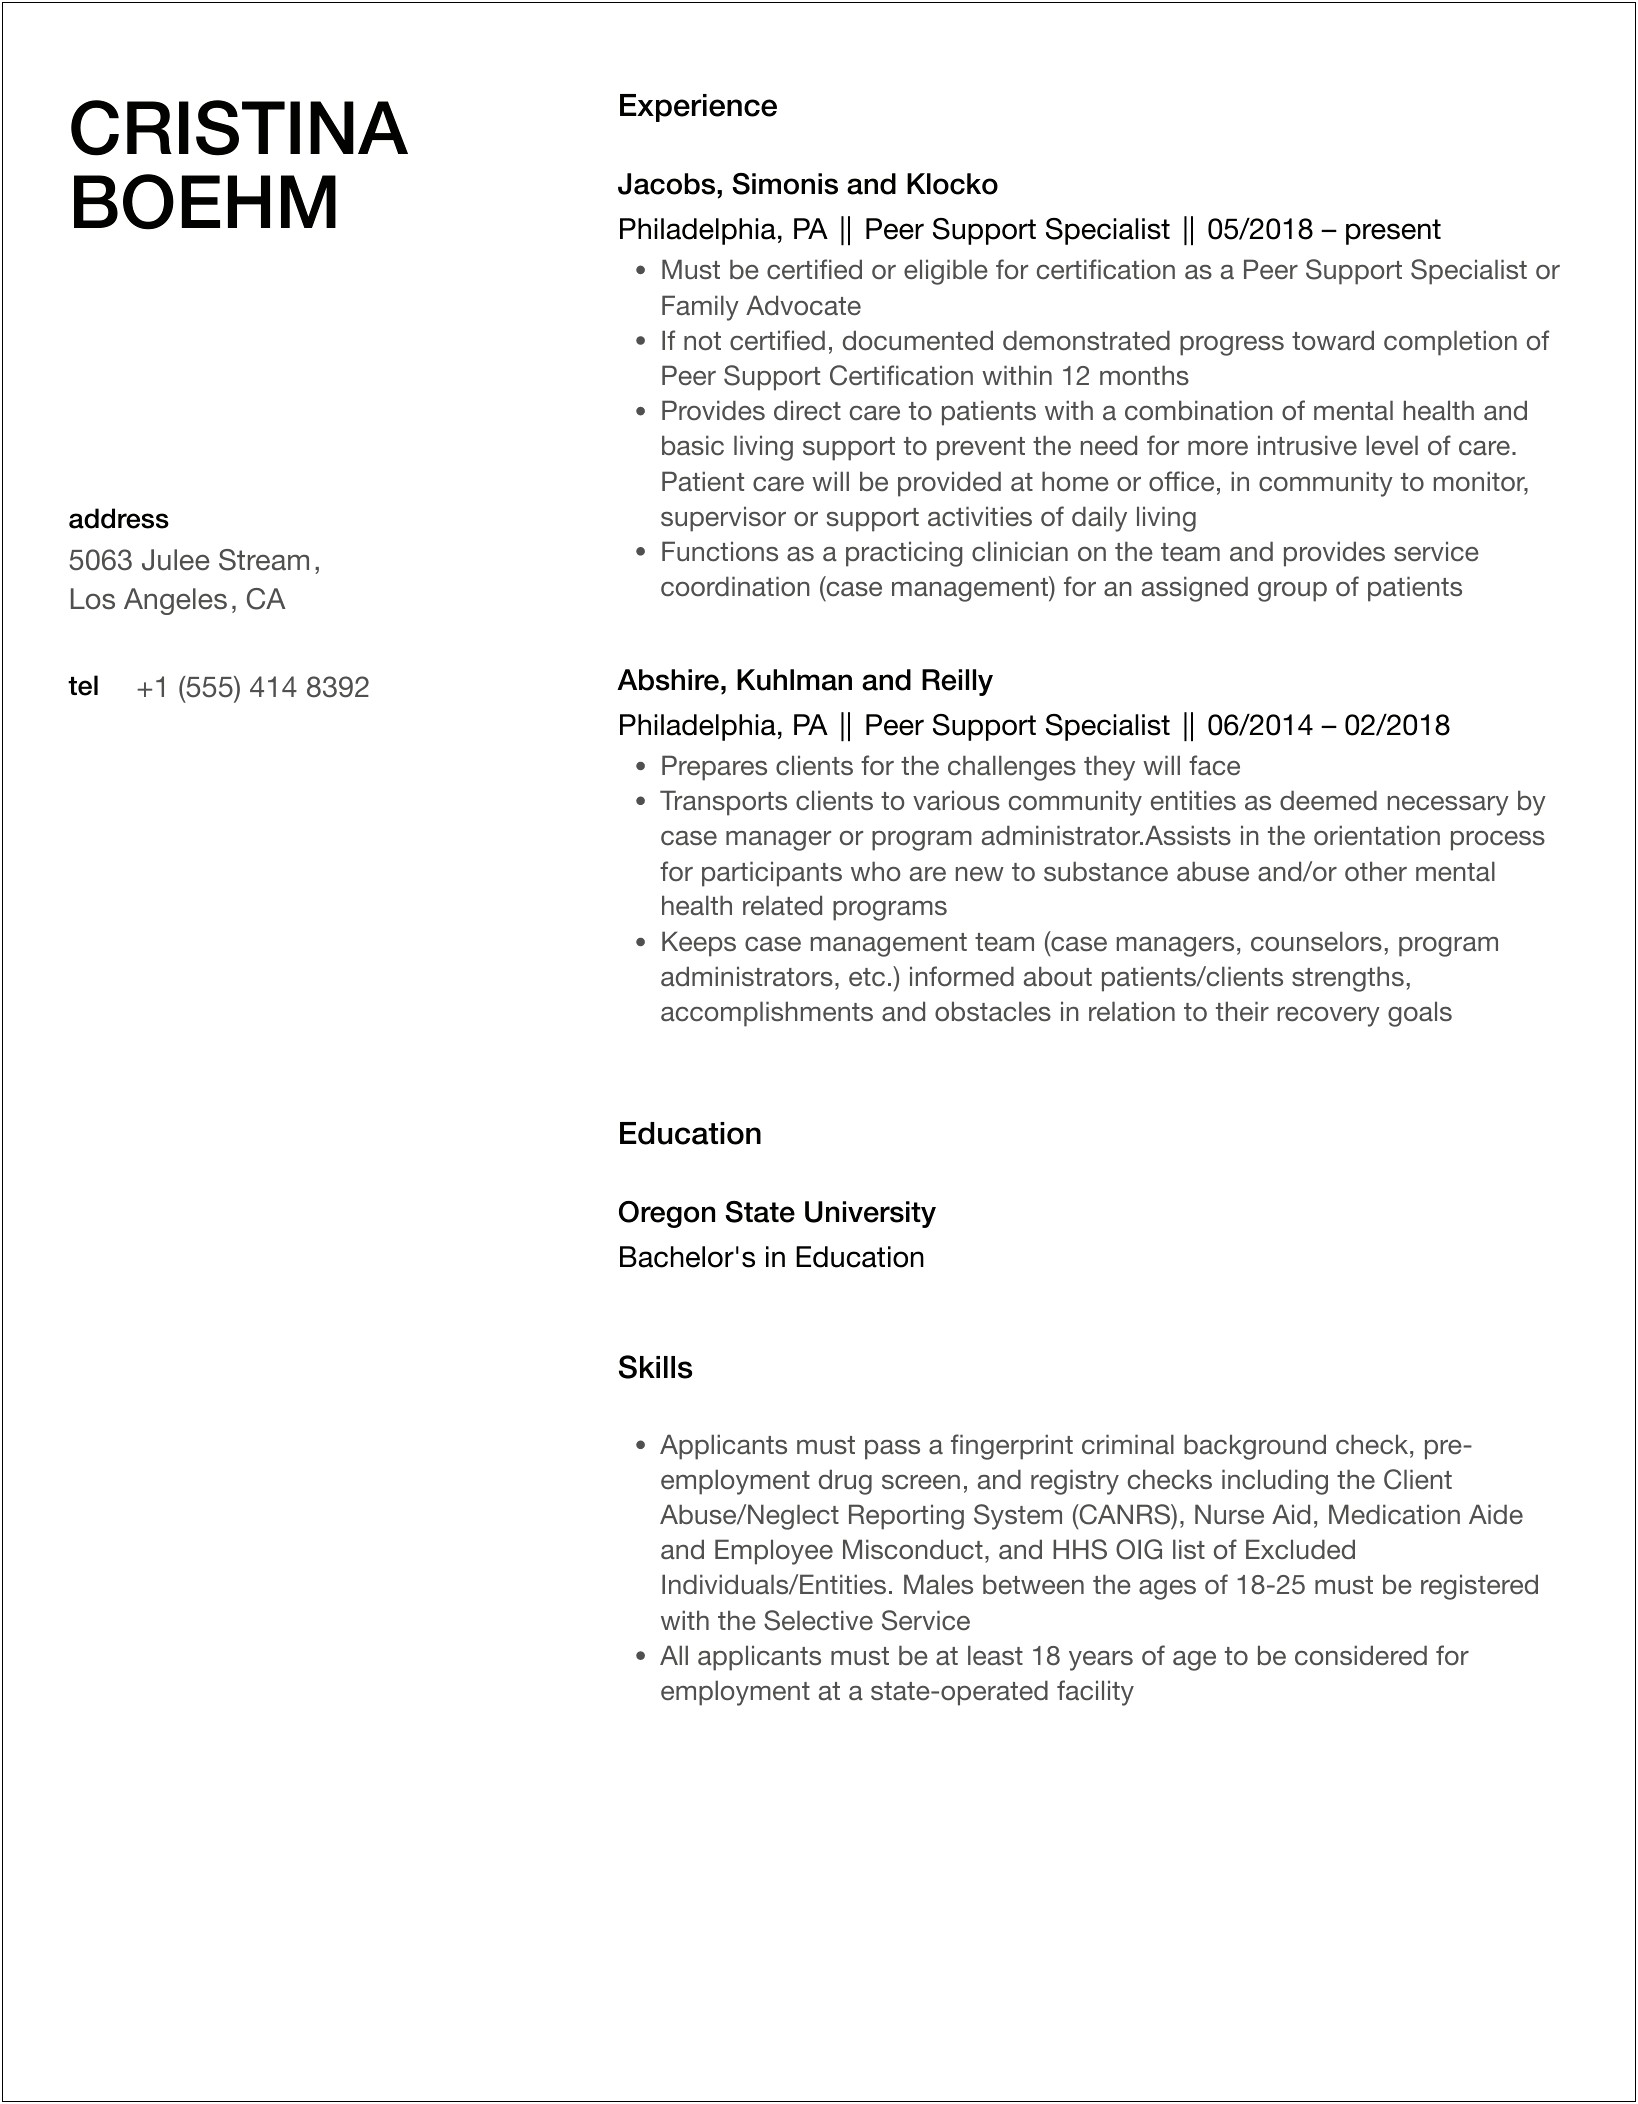 Resume Summary For An Ohio Certified Peer Supporter